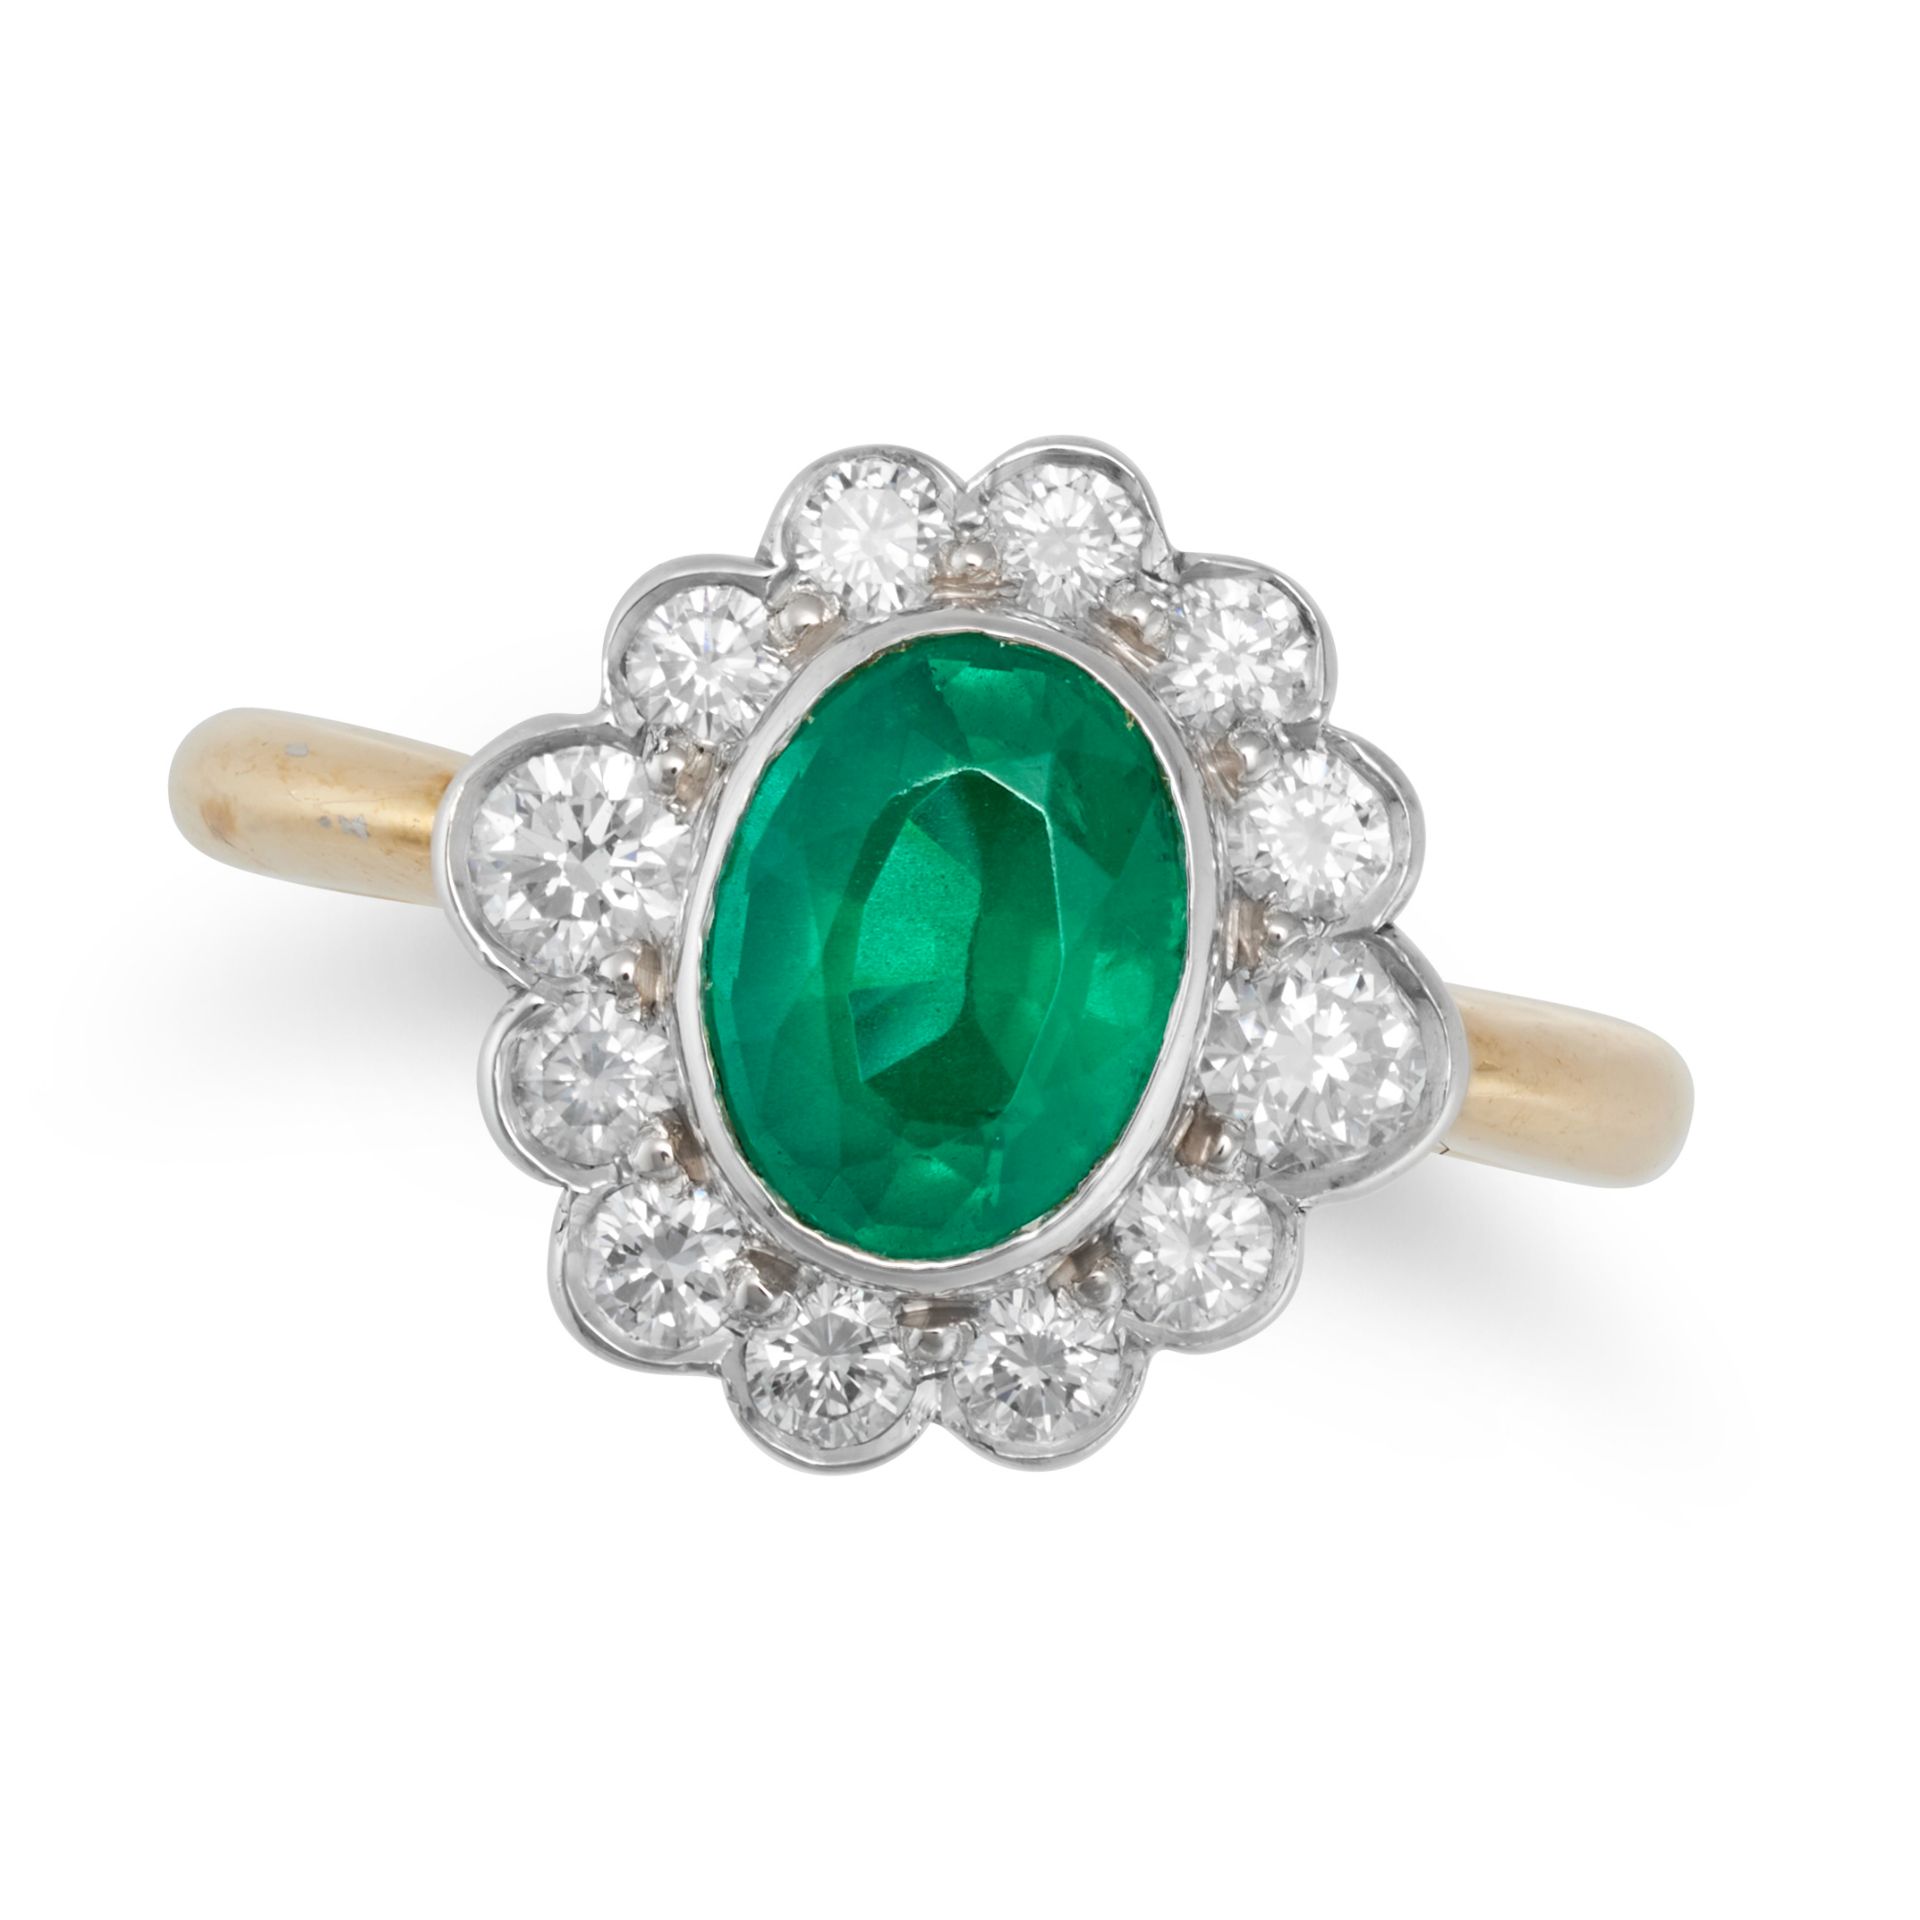 AN EMERALD AND DIAMOND CLUSTER RING in 18ct yellow gold, set with an oval cut emerald in a cluste...